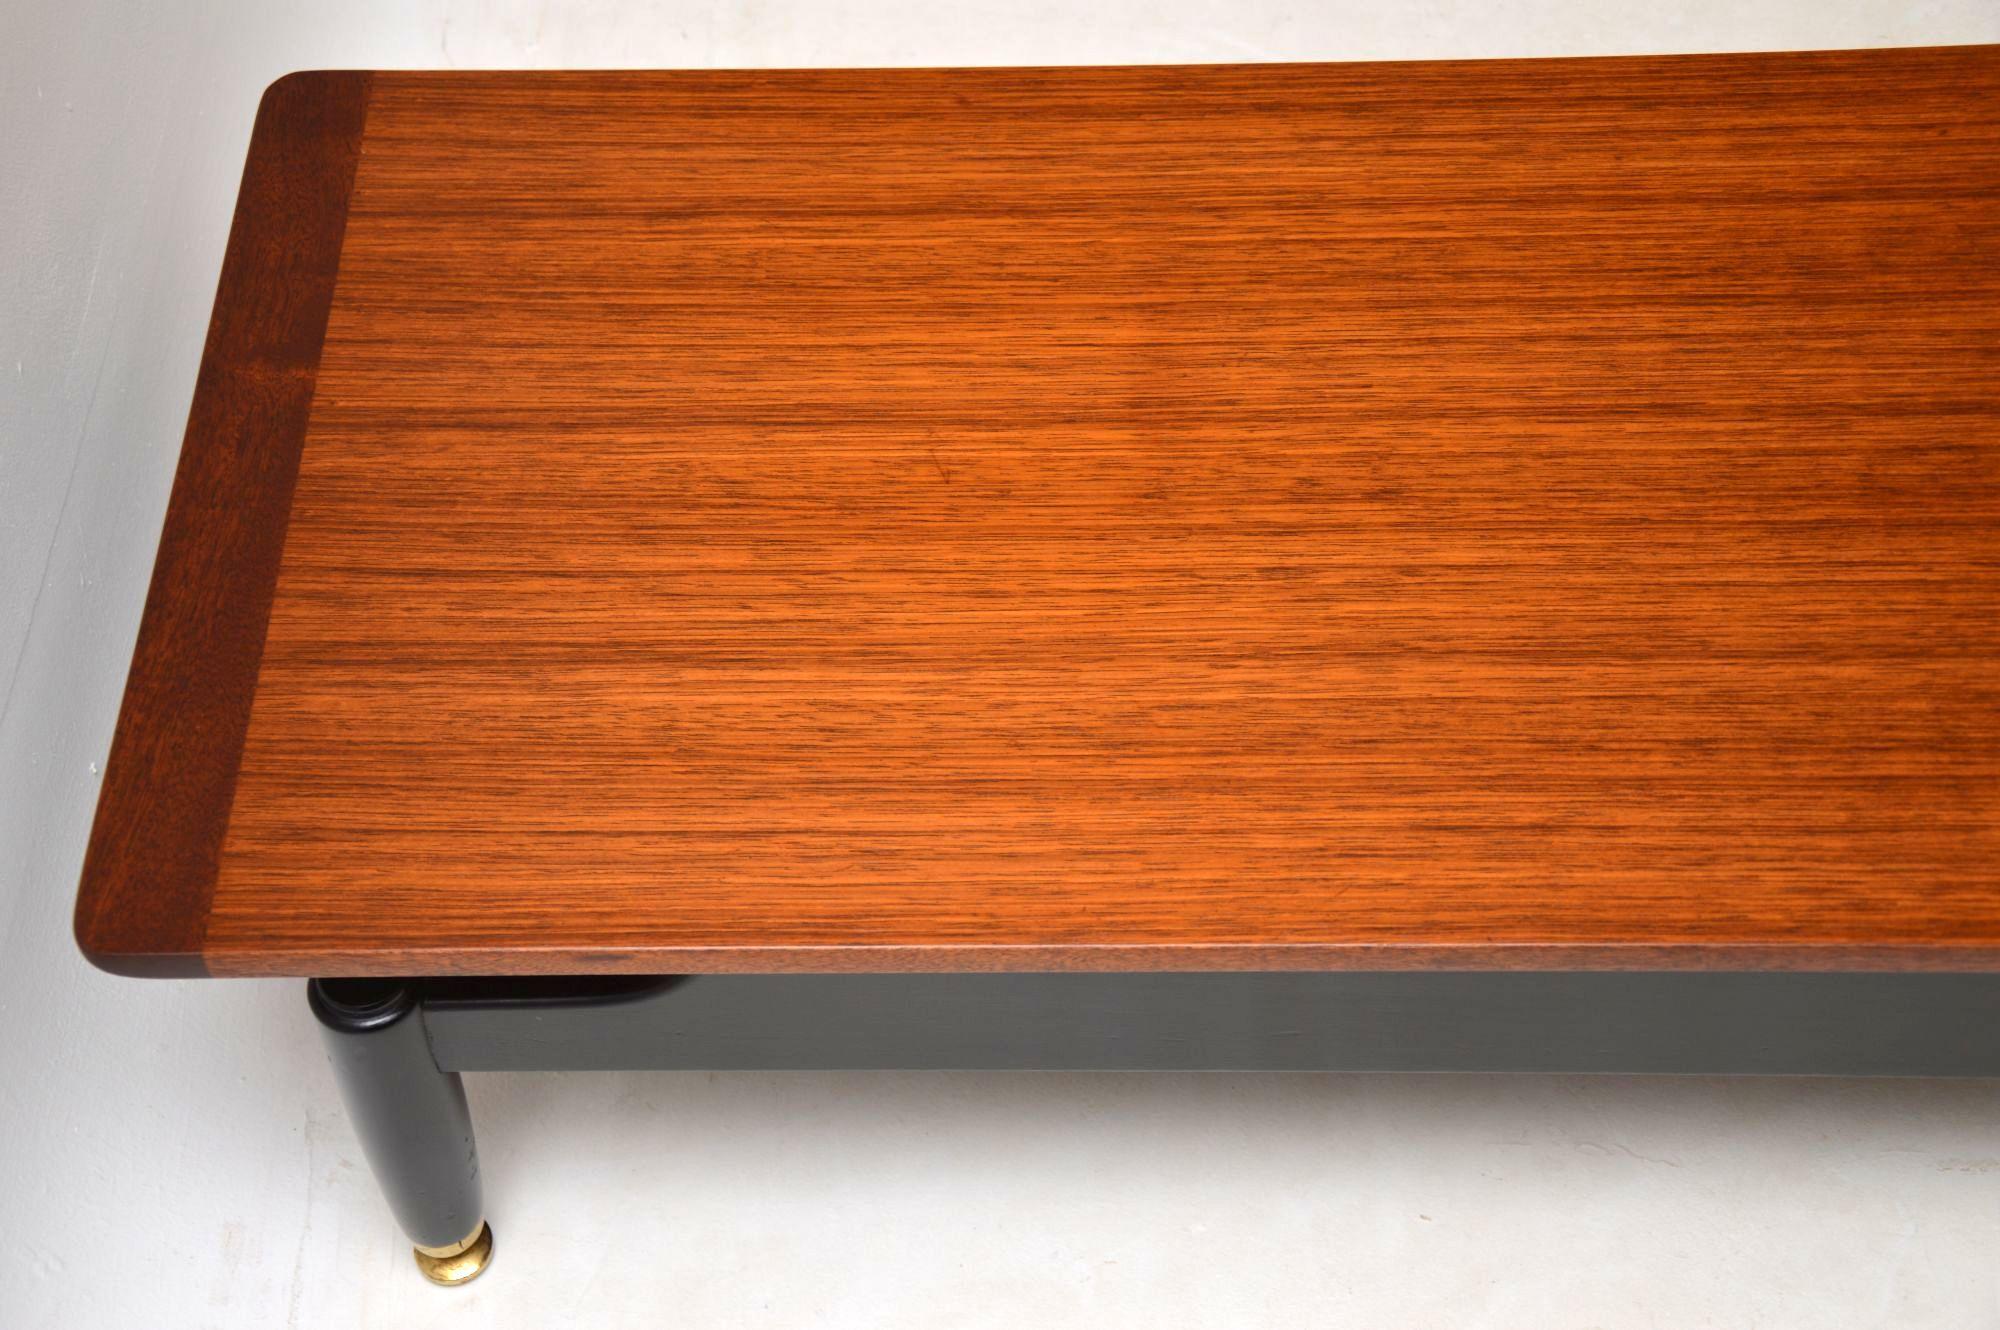 English 1950s Vintage Afromosia Coffee Table / Bench by G- Plan